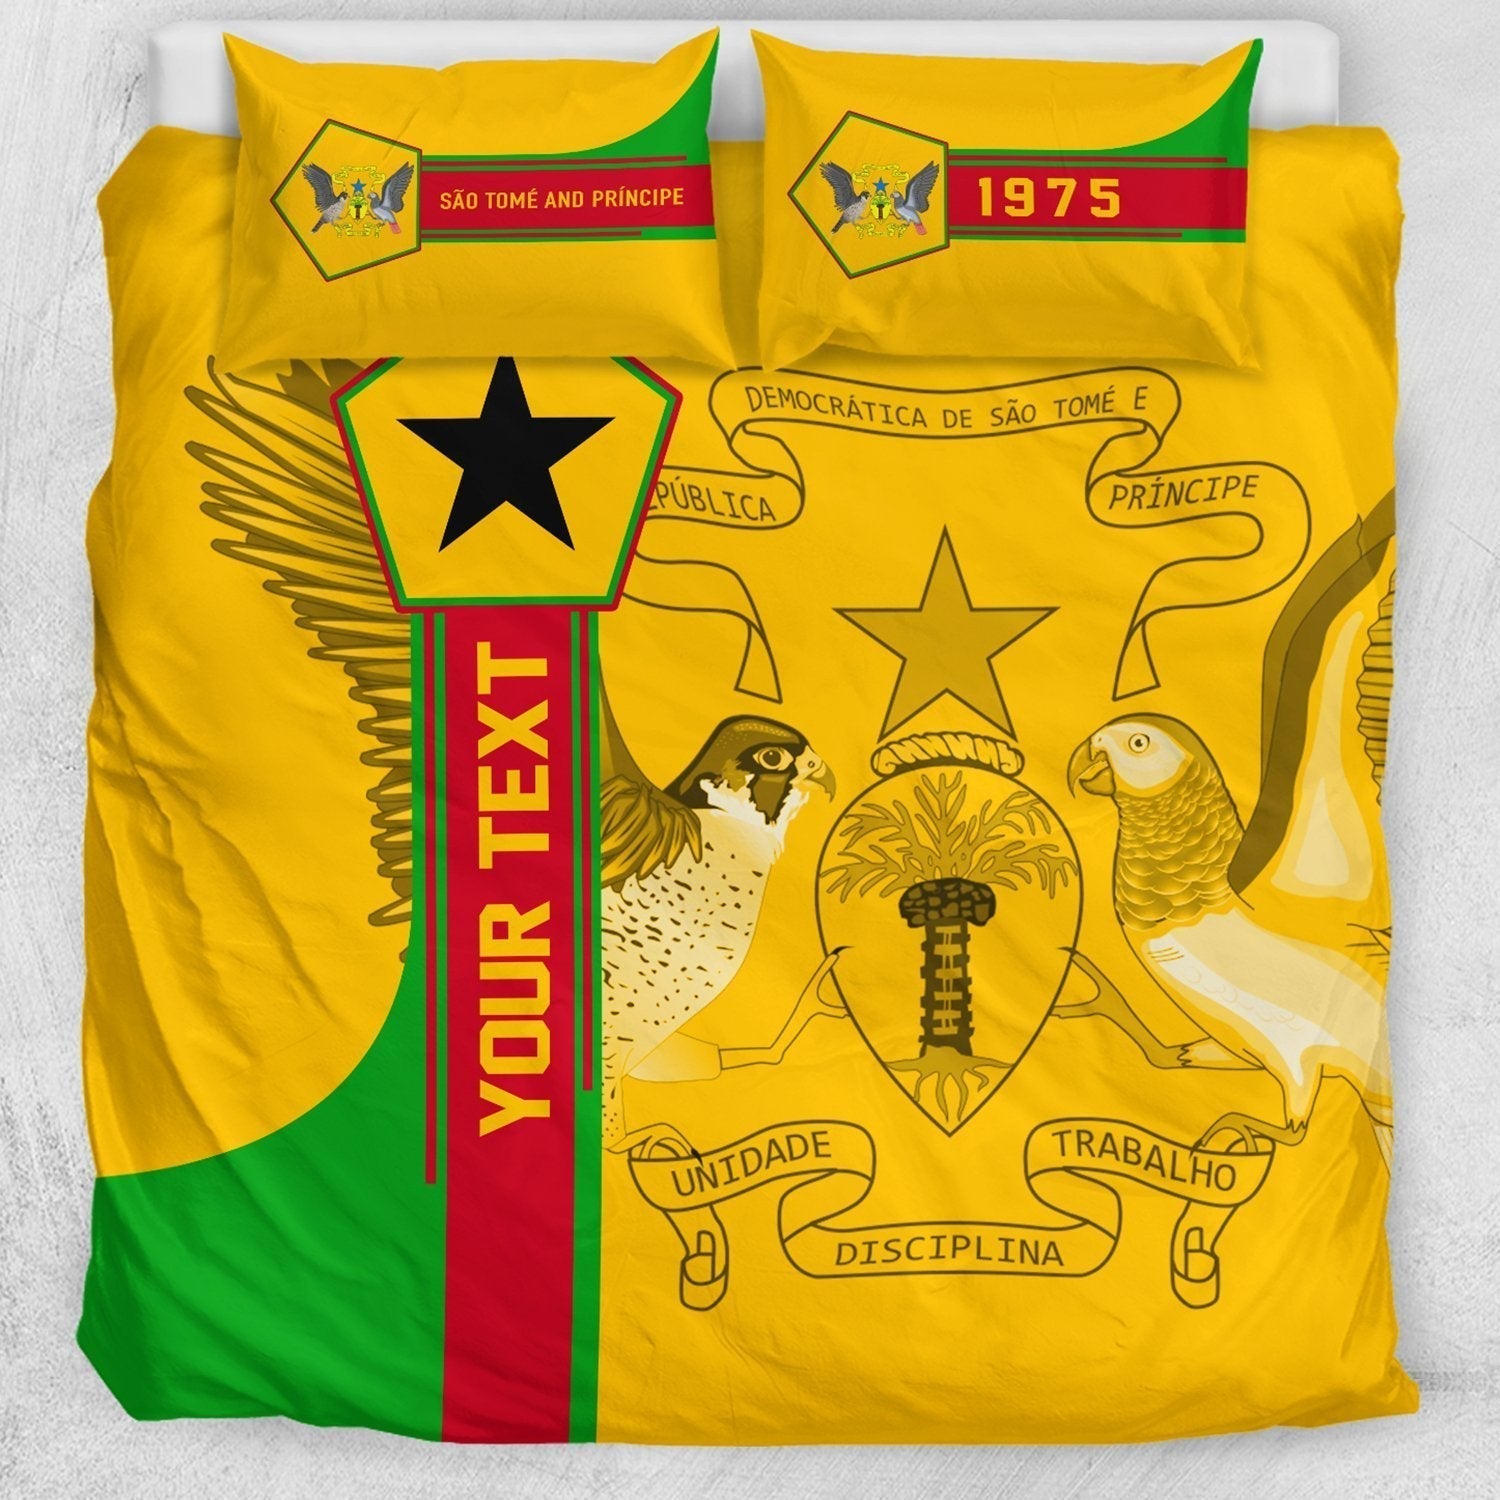 custom-african-bedding-set-sao-tome-and-principe-duvet-cover-pillow-cases-pentagon-style